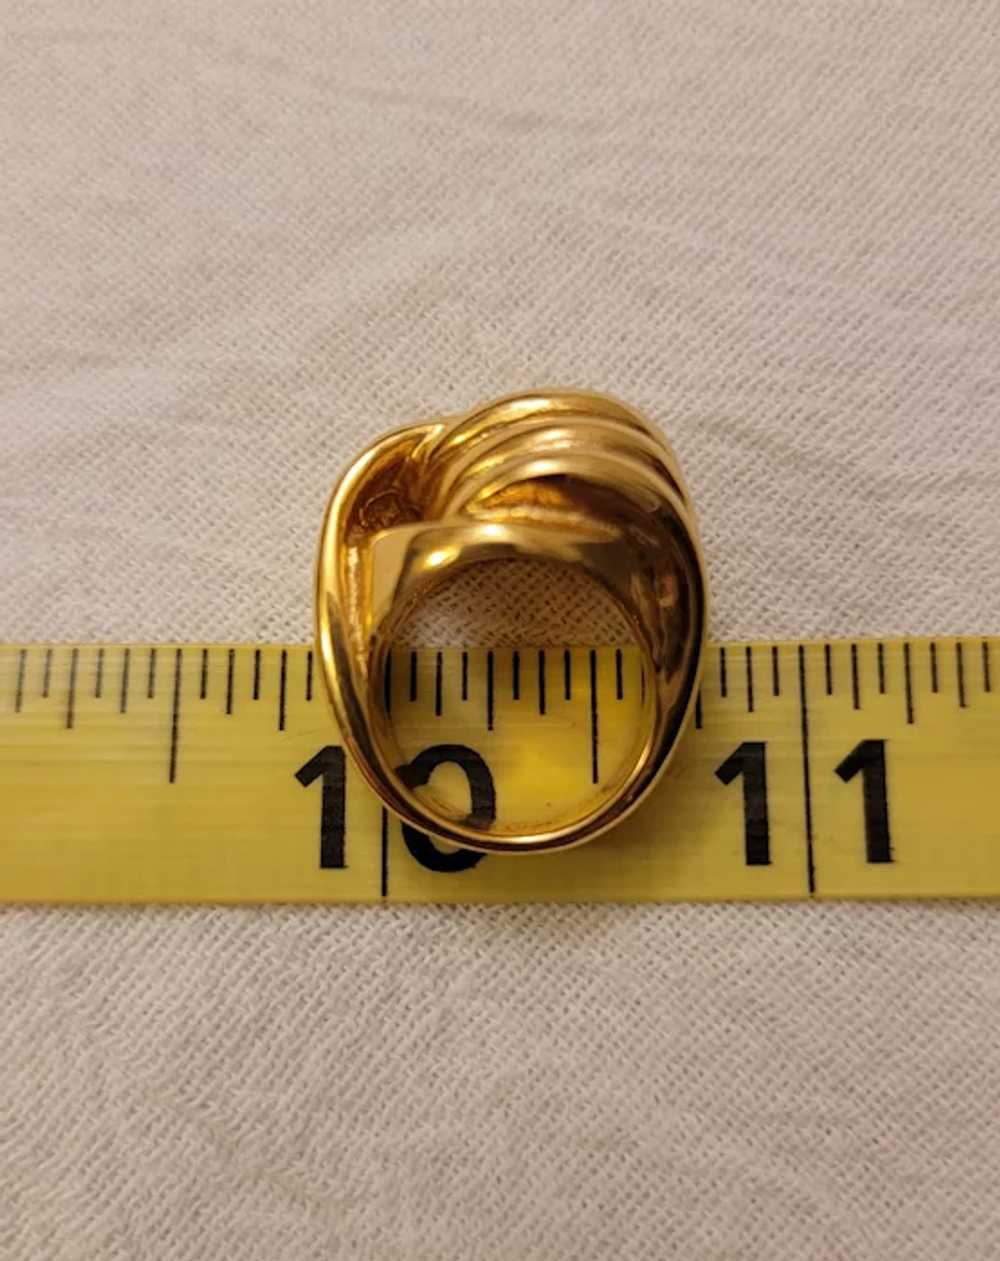 18Kt hge yellow gold ring, knot design - image 2